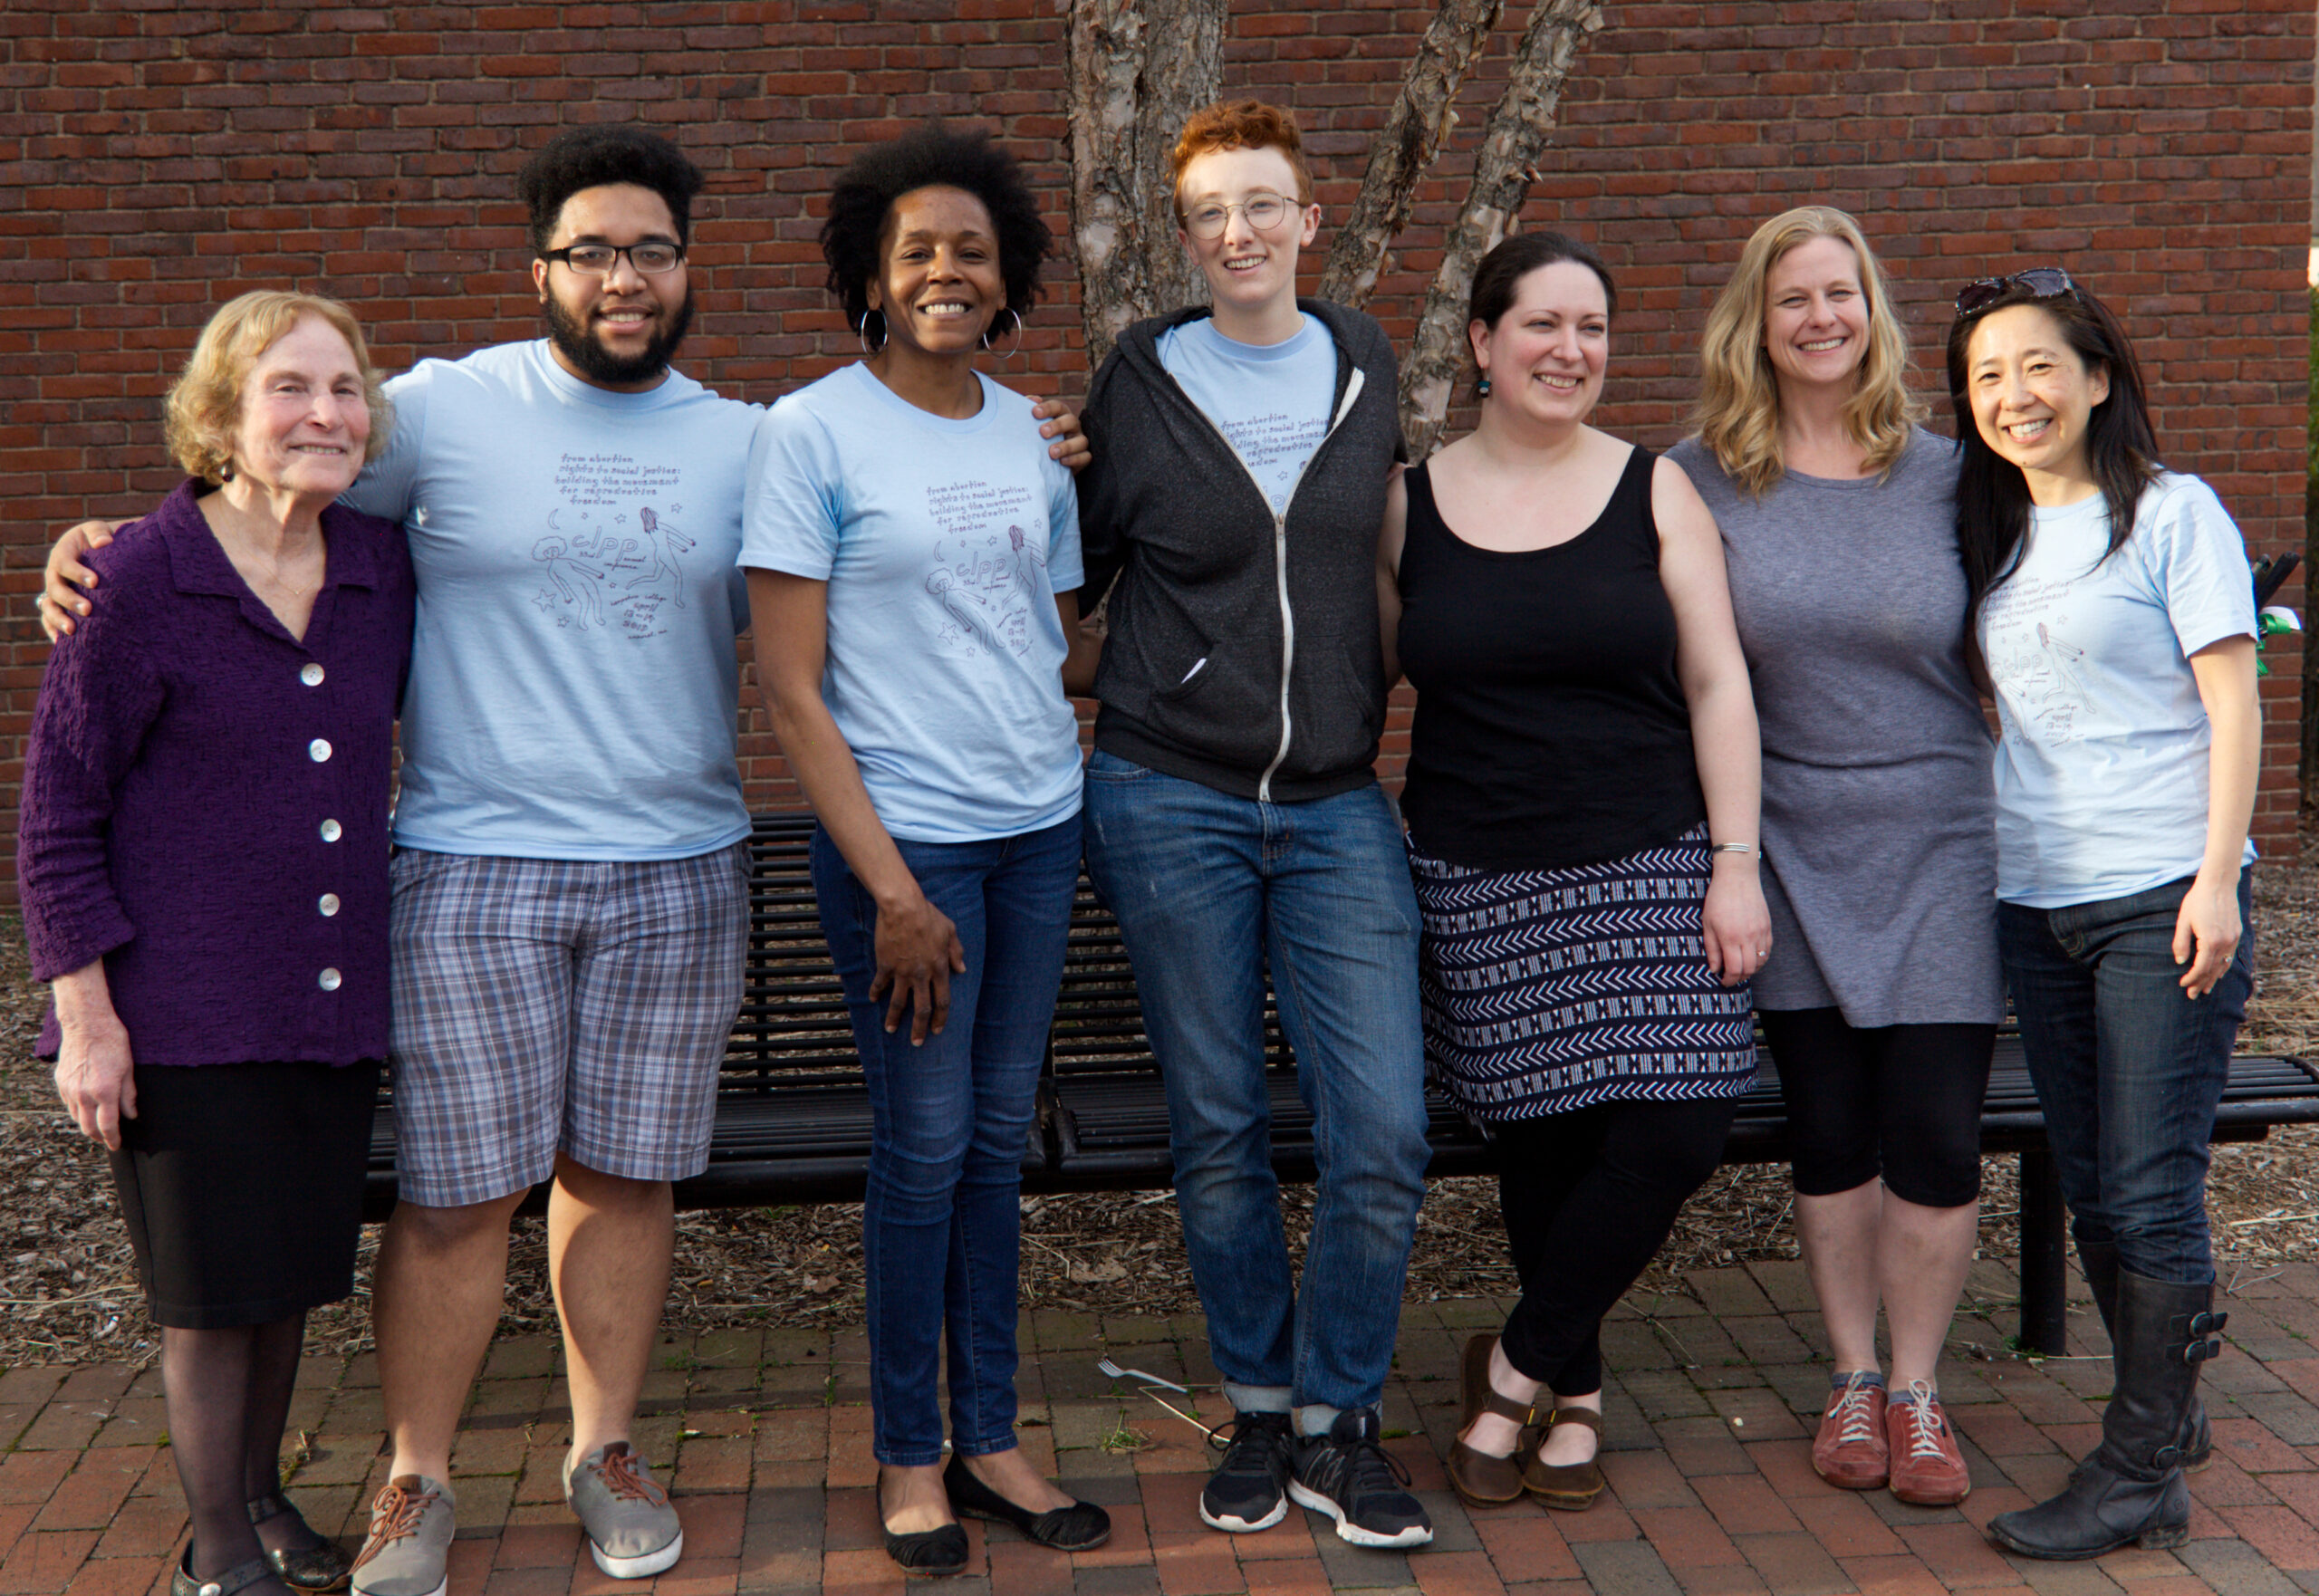 A group of people smiling in front of a bench, tree, and brick wall. They each have their arms around someone and are all showing their teeth. Some are wearing matching light blue t-shirts and others are wearing clothing like a black tank top, grey dress, or purple suit. Theres black curly and straight hair, blonde wavy hair, and short red hair present. Some are wearing boots, tennis shoes, flats, and gym shoes.